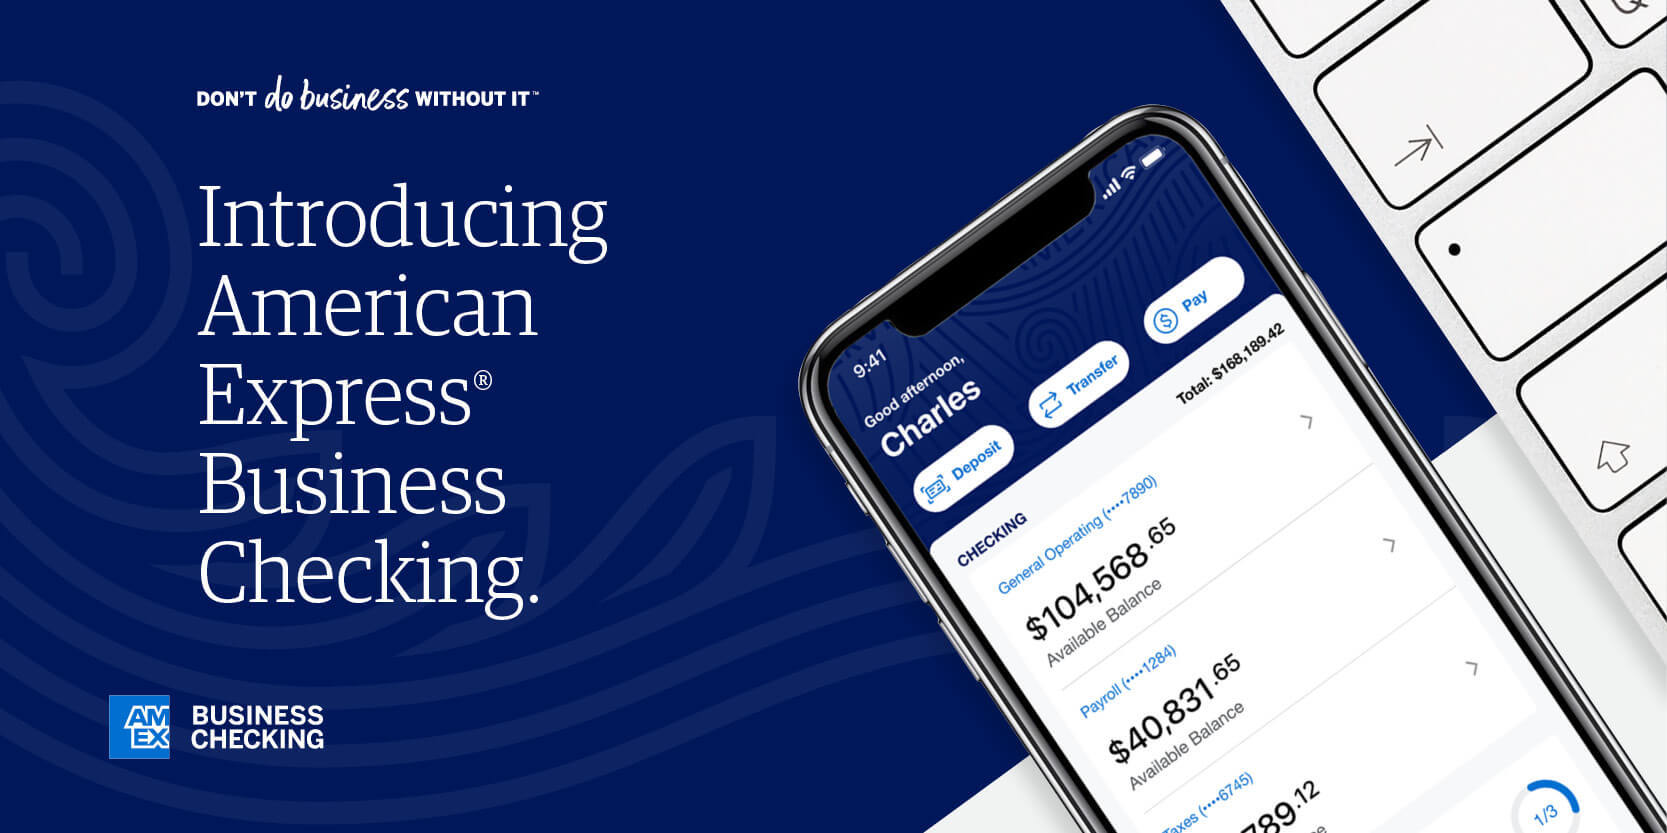 American Express® Launches New Fully Digital Business Checking Account for  . Small and Mid-Sized Businesses, with First-Ever Amex-Issued Debit Card  | Business Wire